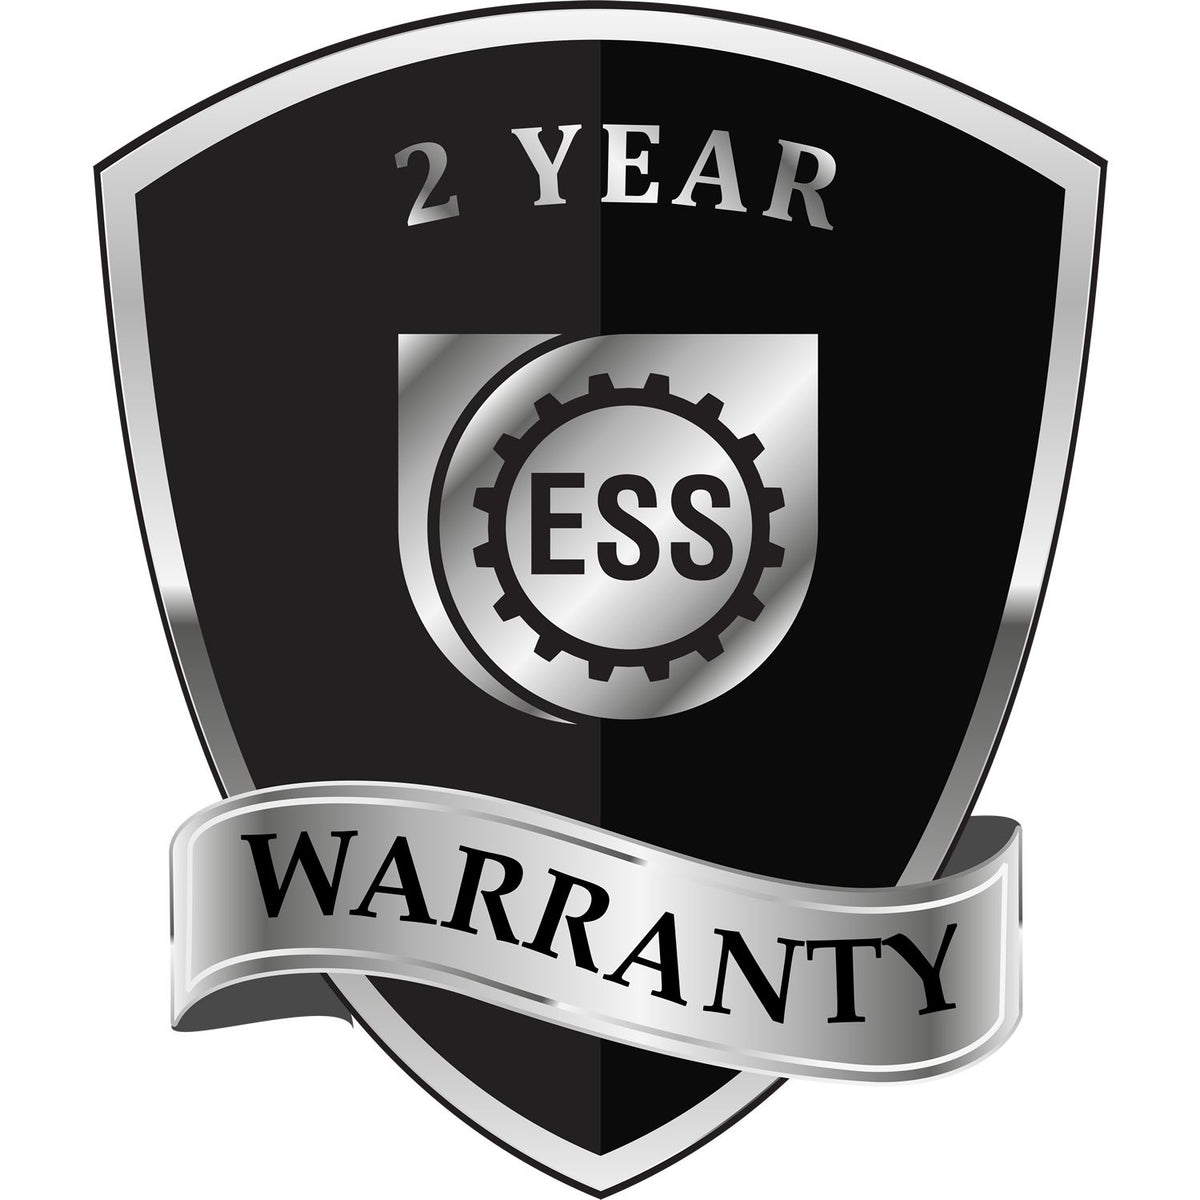 A badge or emblem showing a warranty icon for the Soft Vermont Professional Engineer Seal